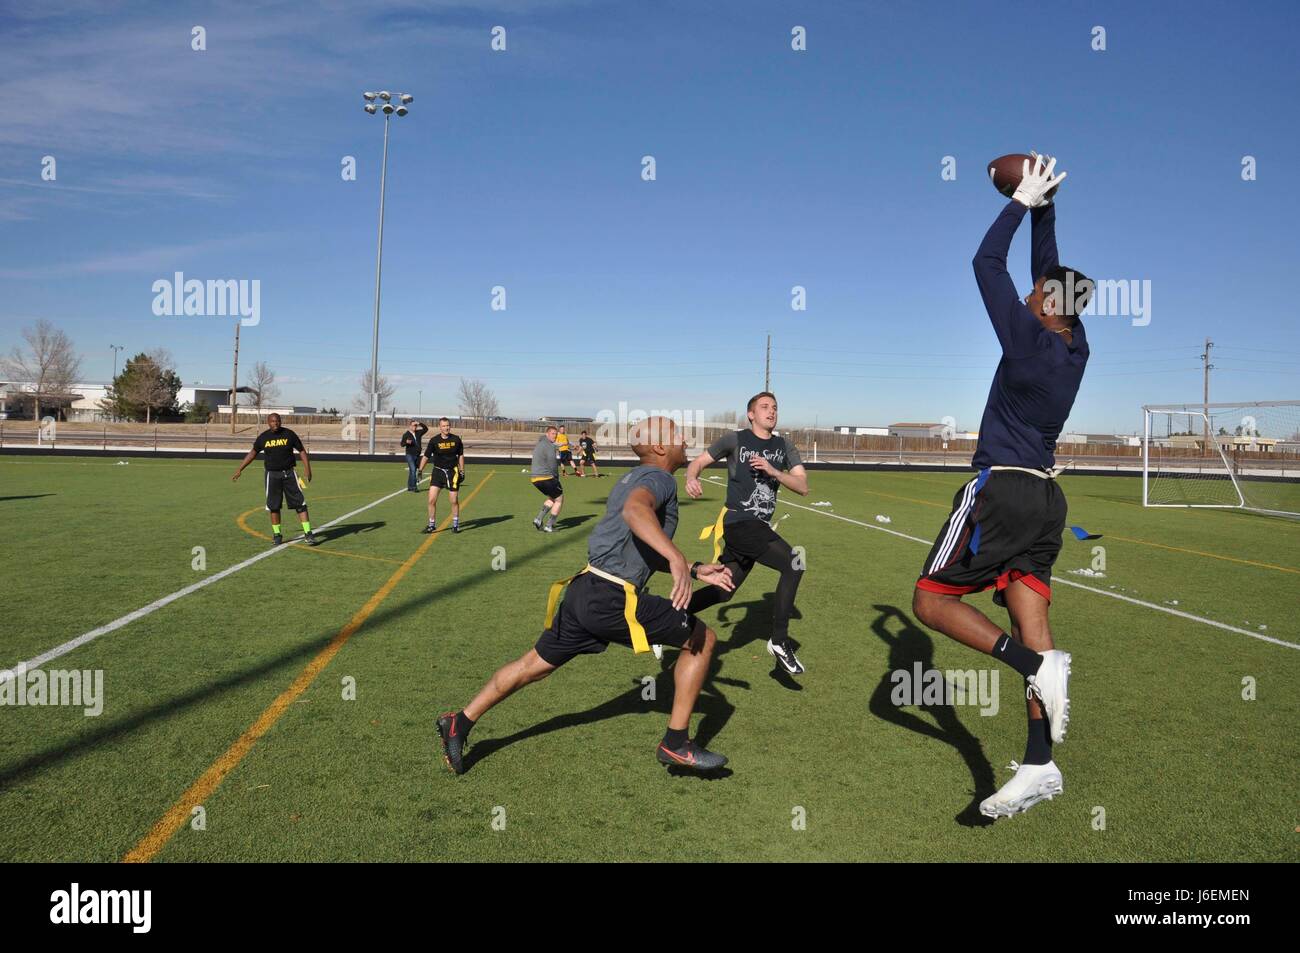 AURORA, Colo. (Dec. 9, 2016) Petty Officer 3rd Class Jay Atkins, assigned to Navy Information Operations Command (NIOC) Colorado/Task Force 1080, catches a 25-yard touchdown pass during an annual Army-Navy flag football game at Buckley Air Force Base in Aurora, Colo. The NIOC Colorado Navy flag football team was defeated by the Army  team by a score of 14-8. (U.S. Navy photo by Petty Officer 2nd Class Robert A. Hartland/Released) Stock Photo